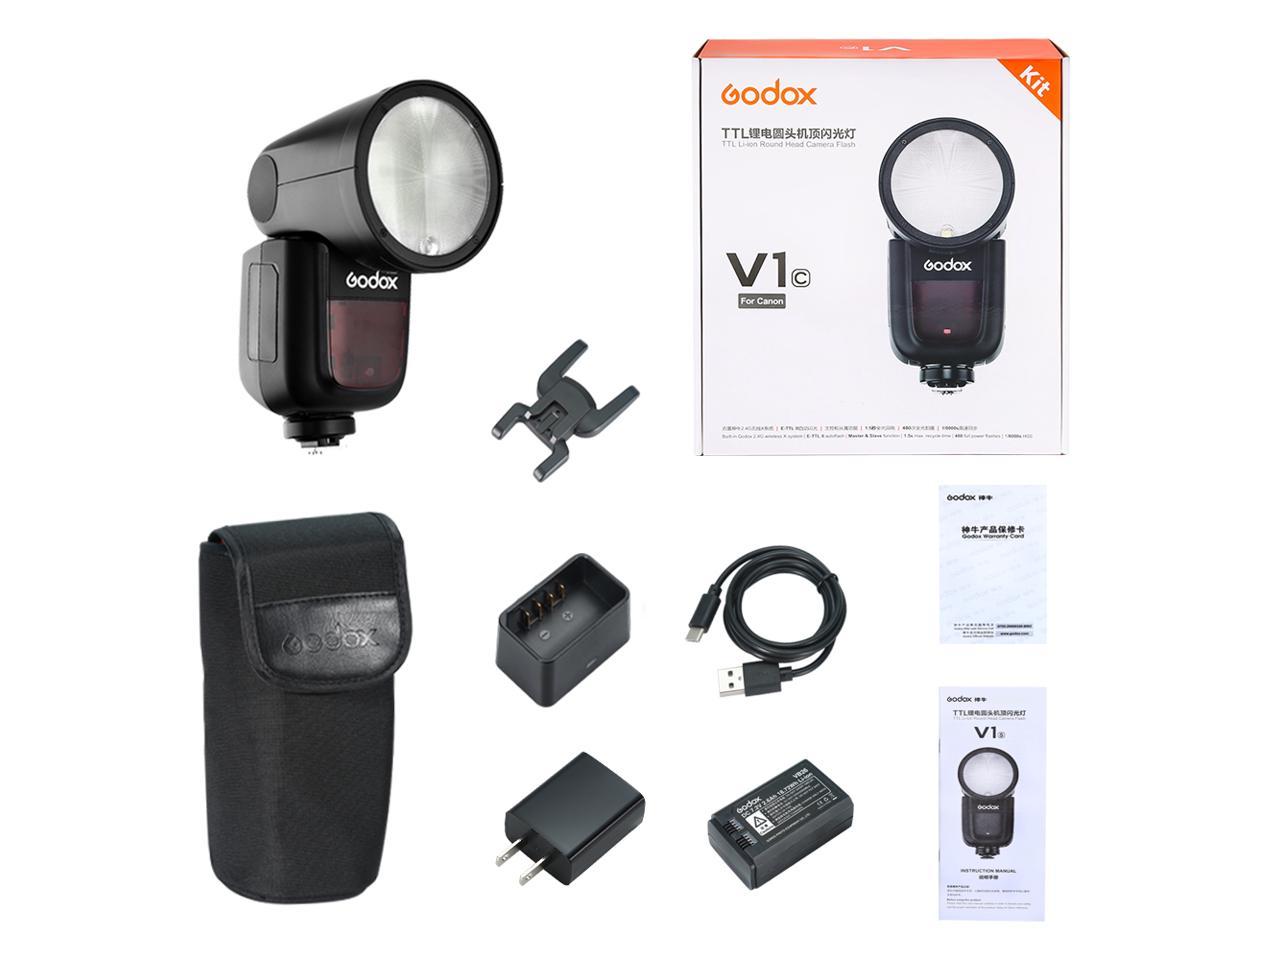 1.5 sec Godox V1-C Flash with Godox Xpro-C TTL Flash Trigger for Canon 2600mAh Lithium Battery Recycle Time 76Ws 2.4G TTL Round Head Flash Speedlight 10 Level LED Modeling Lamp 1/8000 HSS 